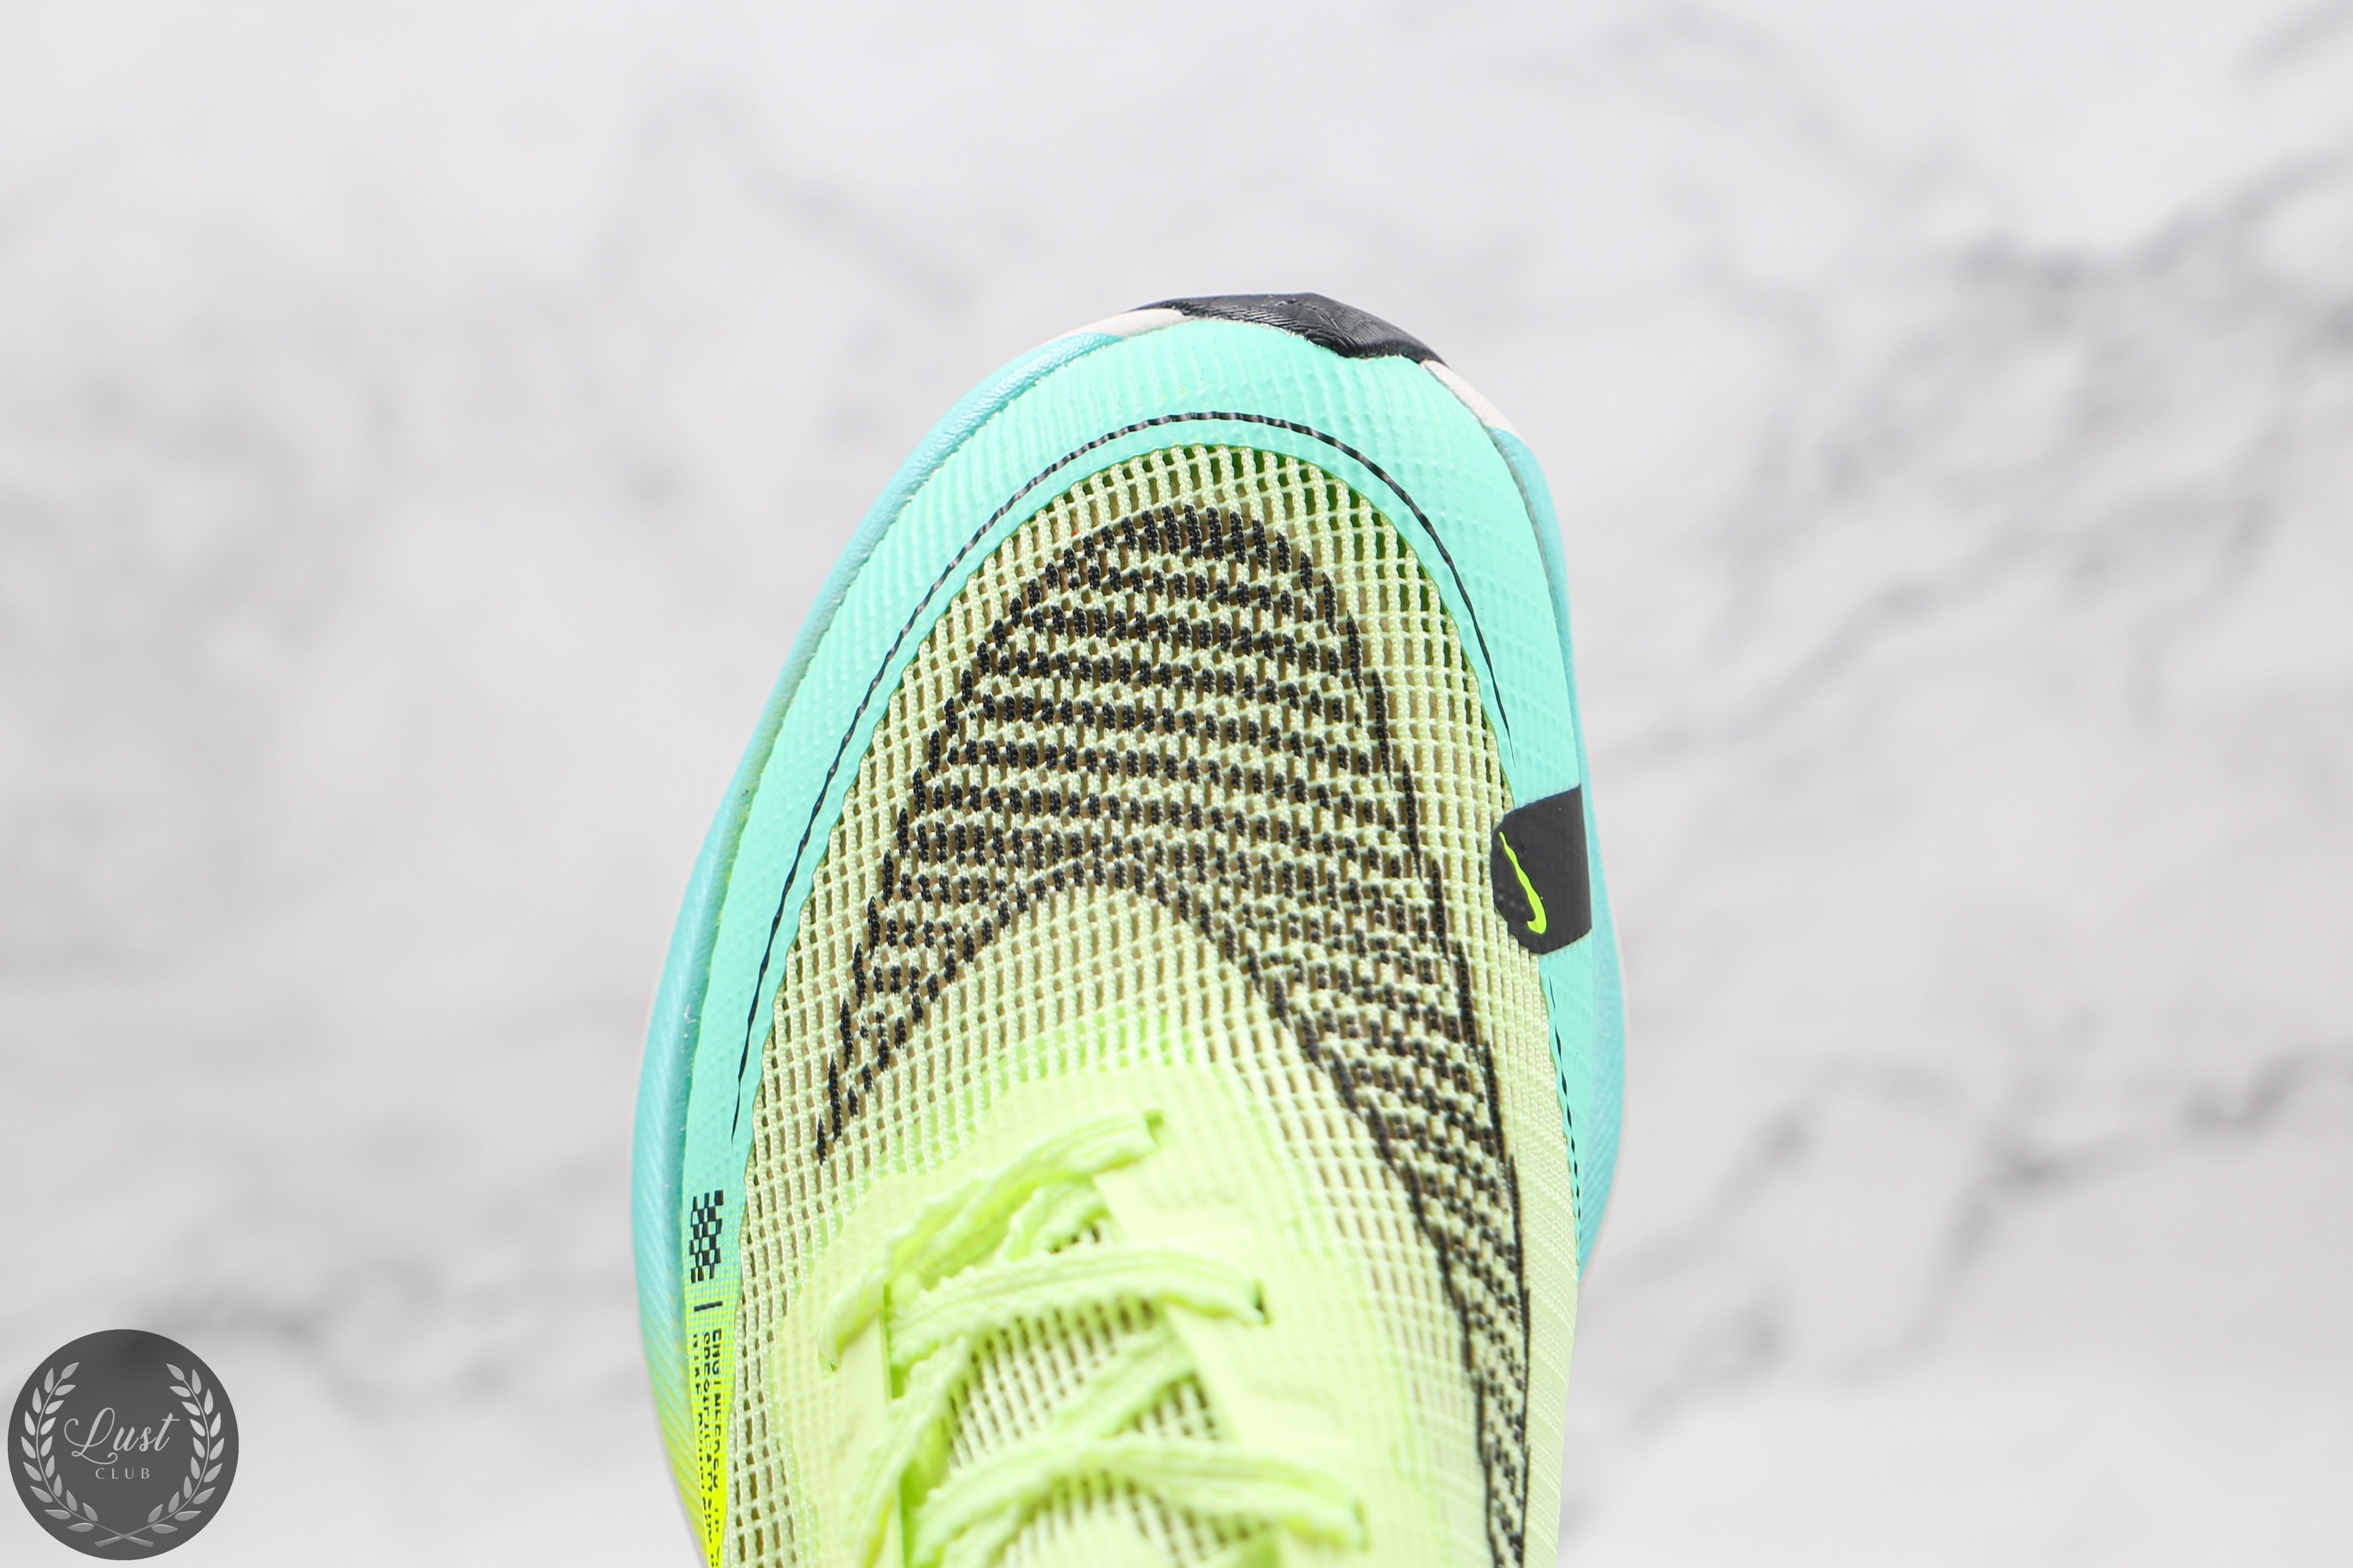 Nike ZoomX Vaporfly Next% 2 Barely Volt Turquoise